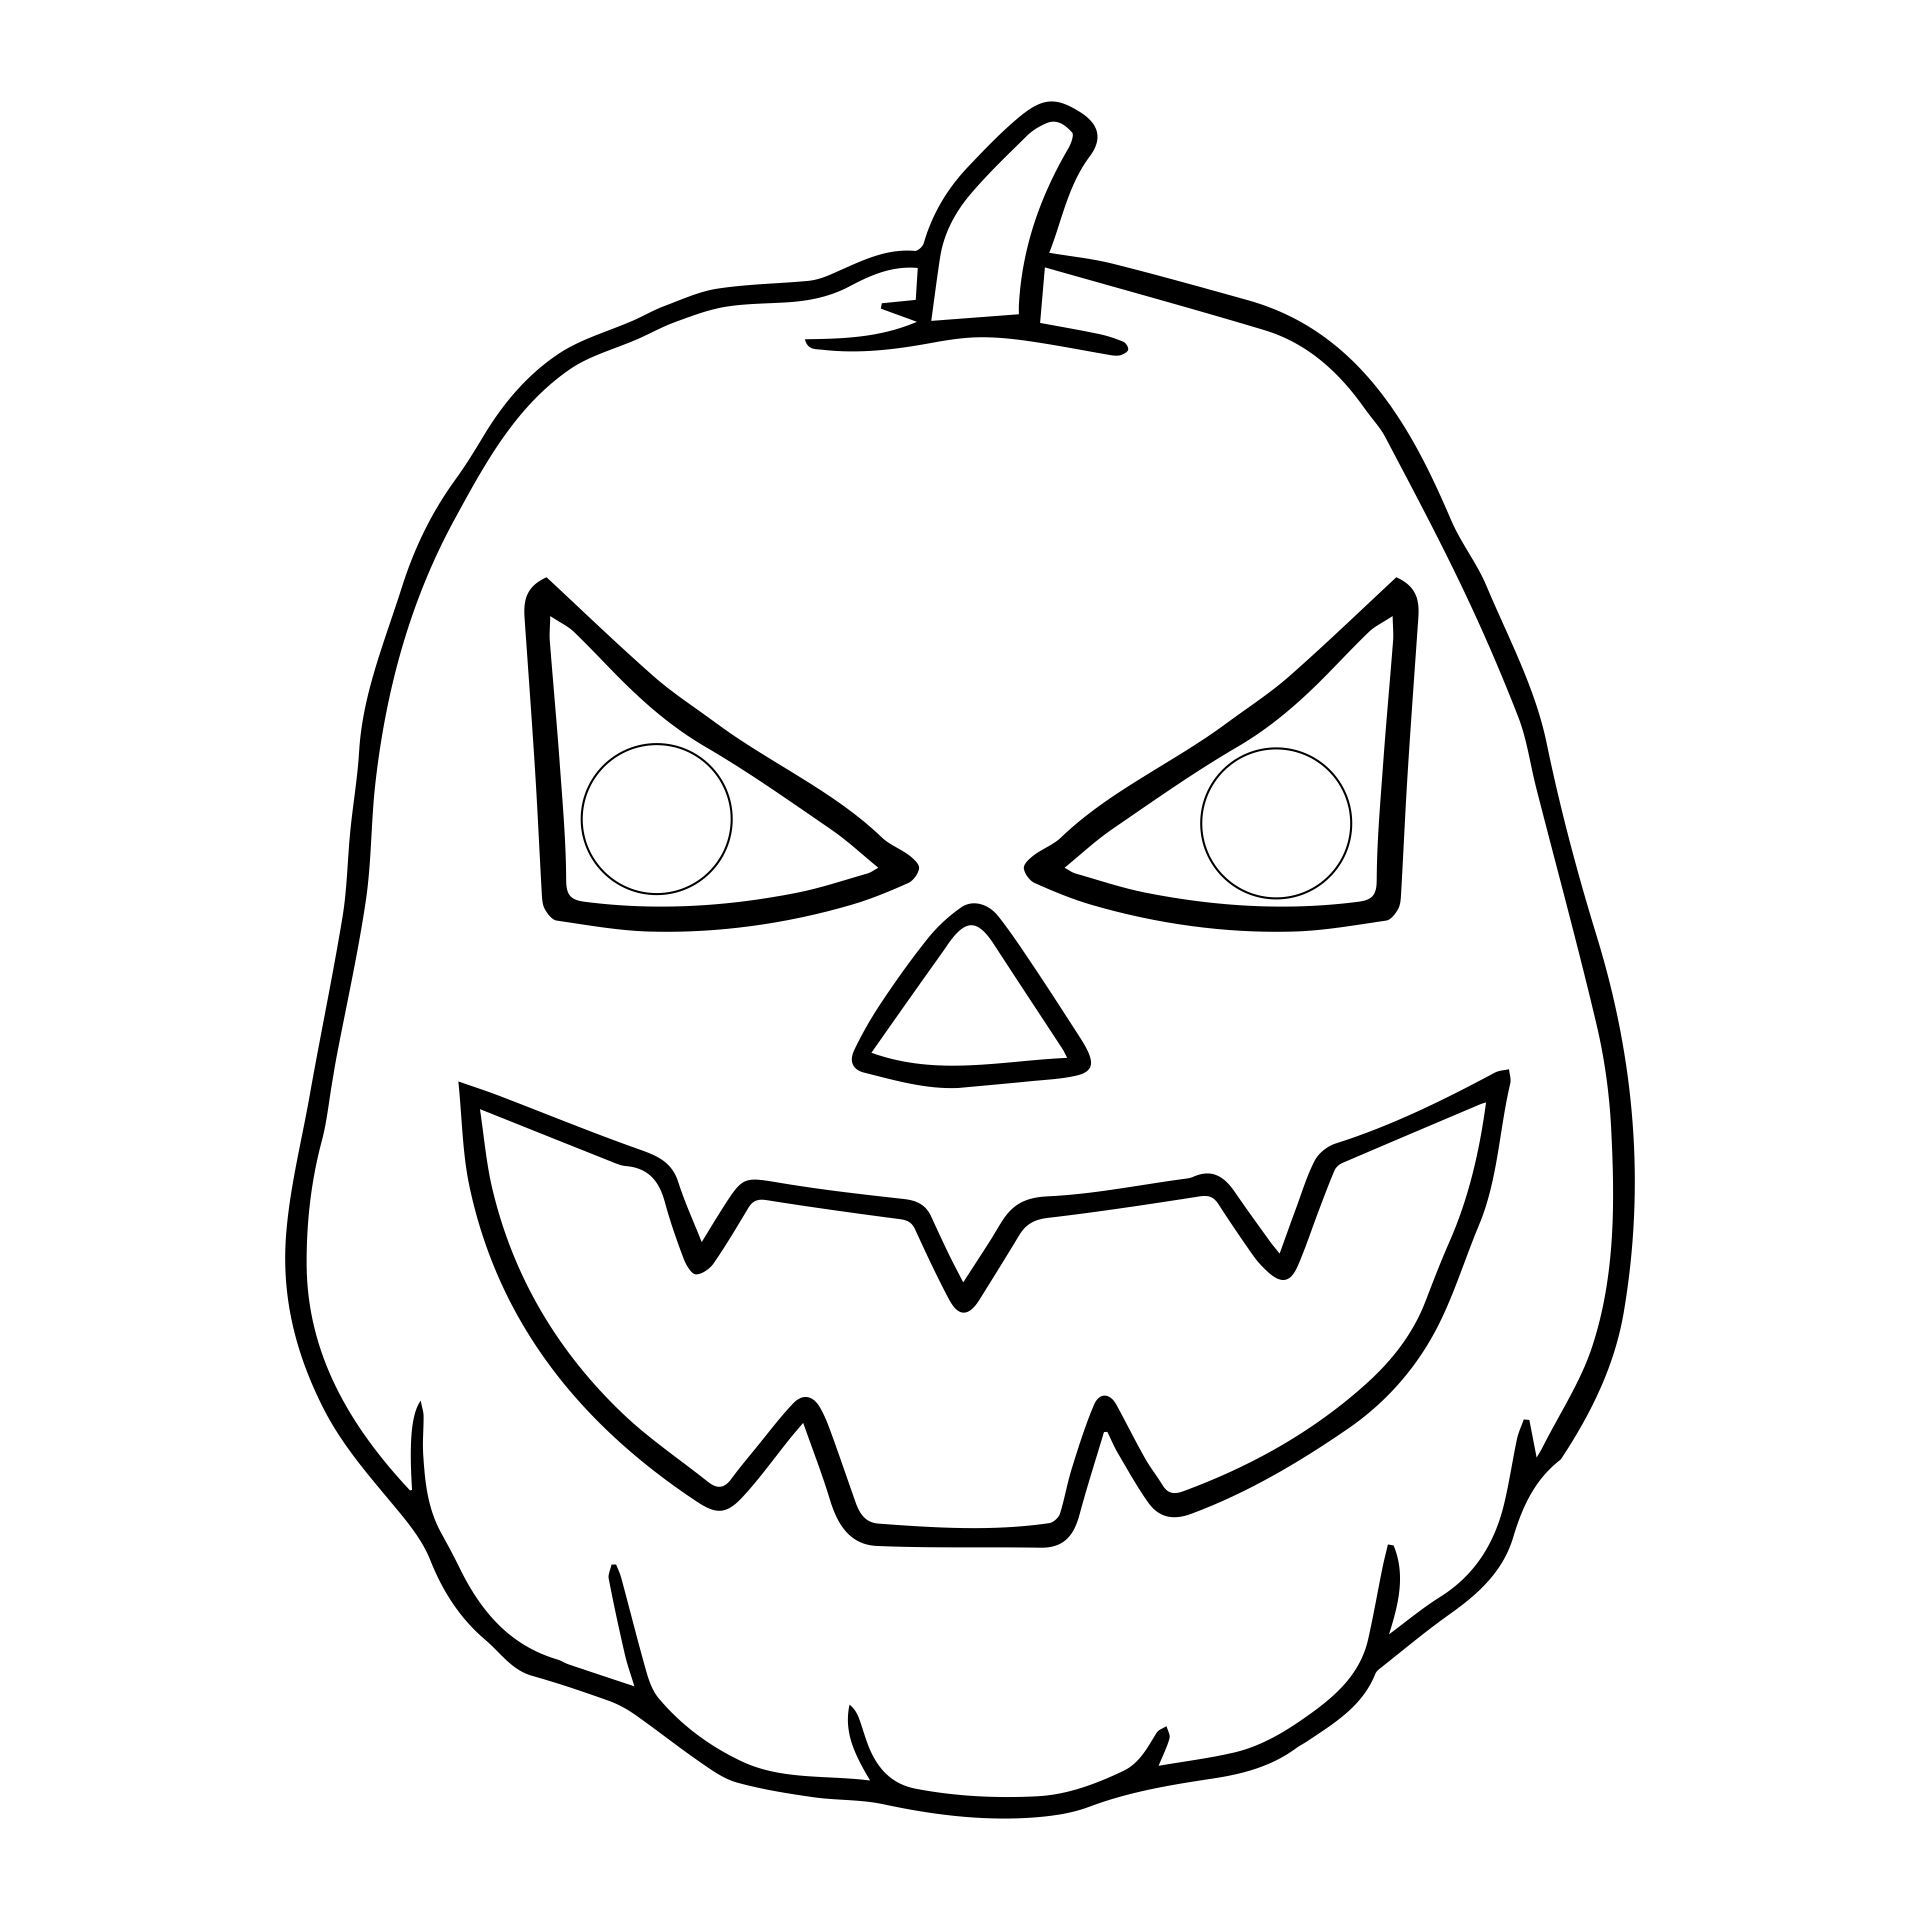 15 Best Halloween Mask Printable Coloring Pages PDF For Free At Printablee